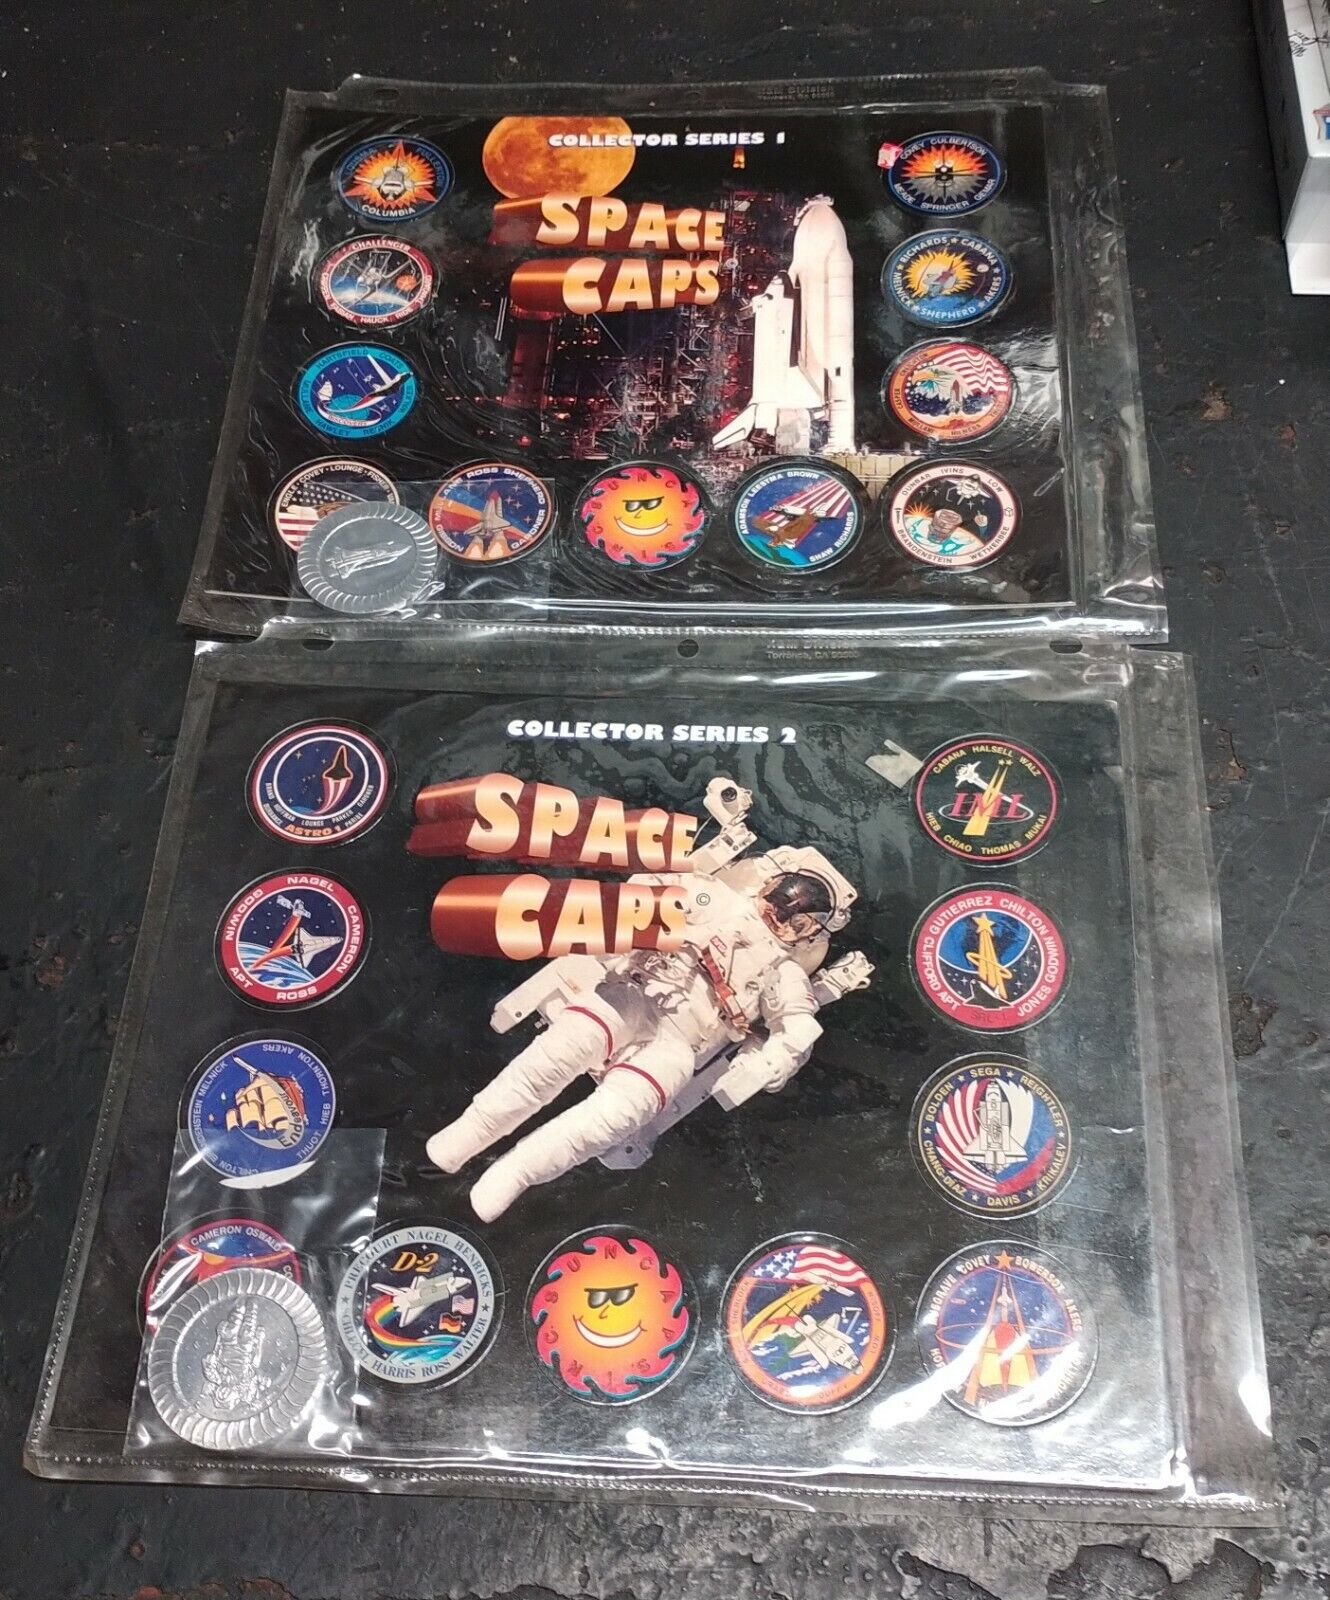 1995 NASA Space Caps Collector Series 1 & 2 Pogs Set SPACE SHUTTLES RARE MINT